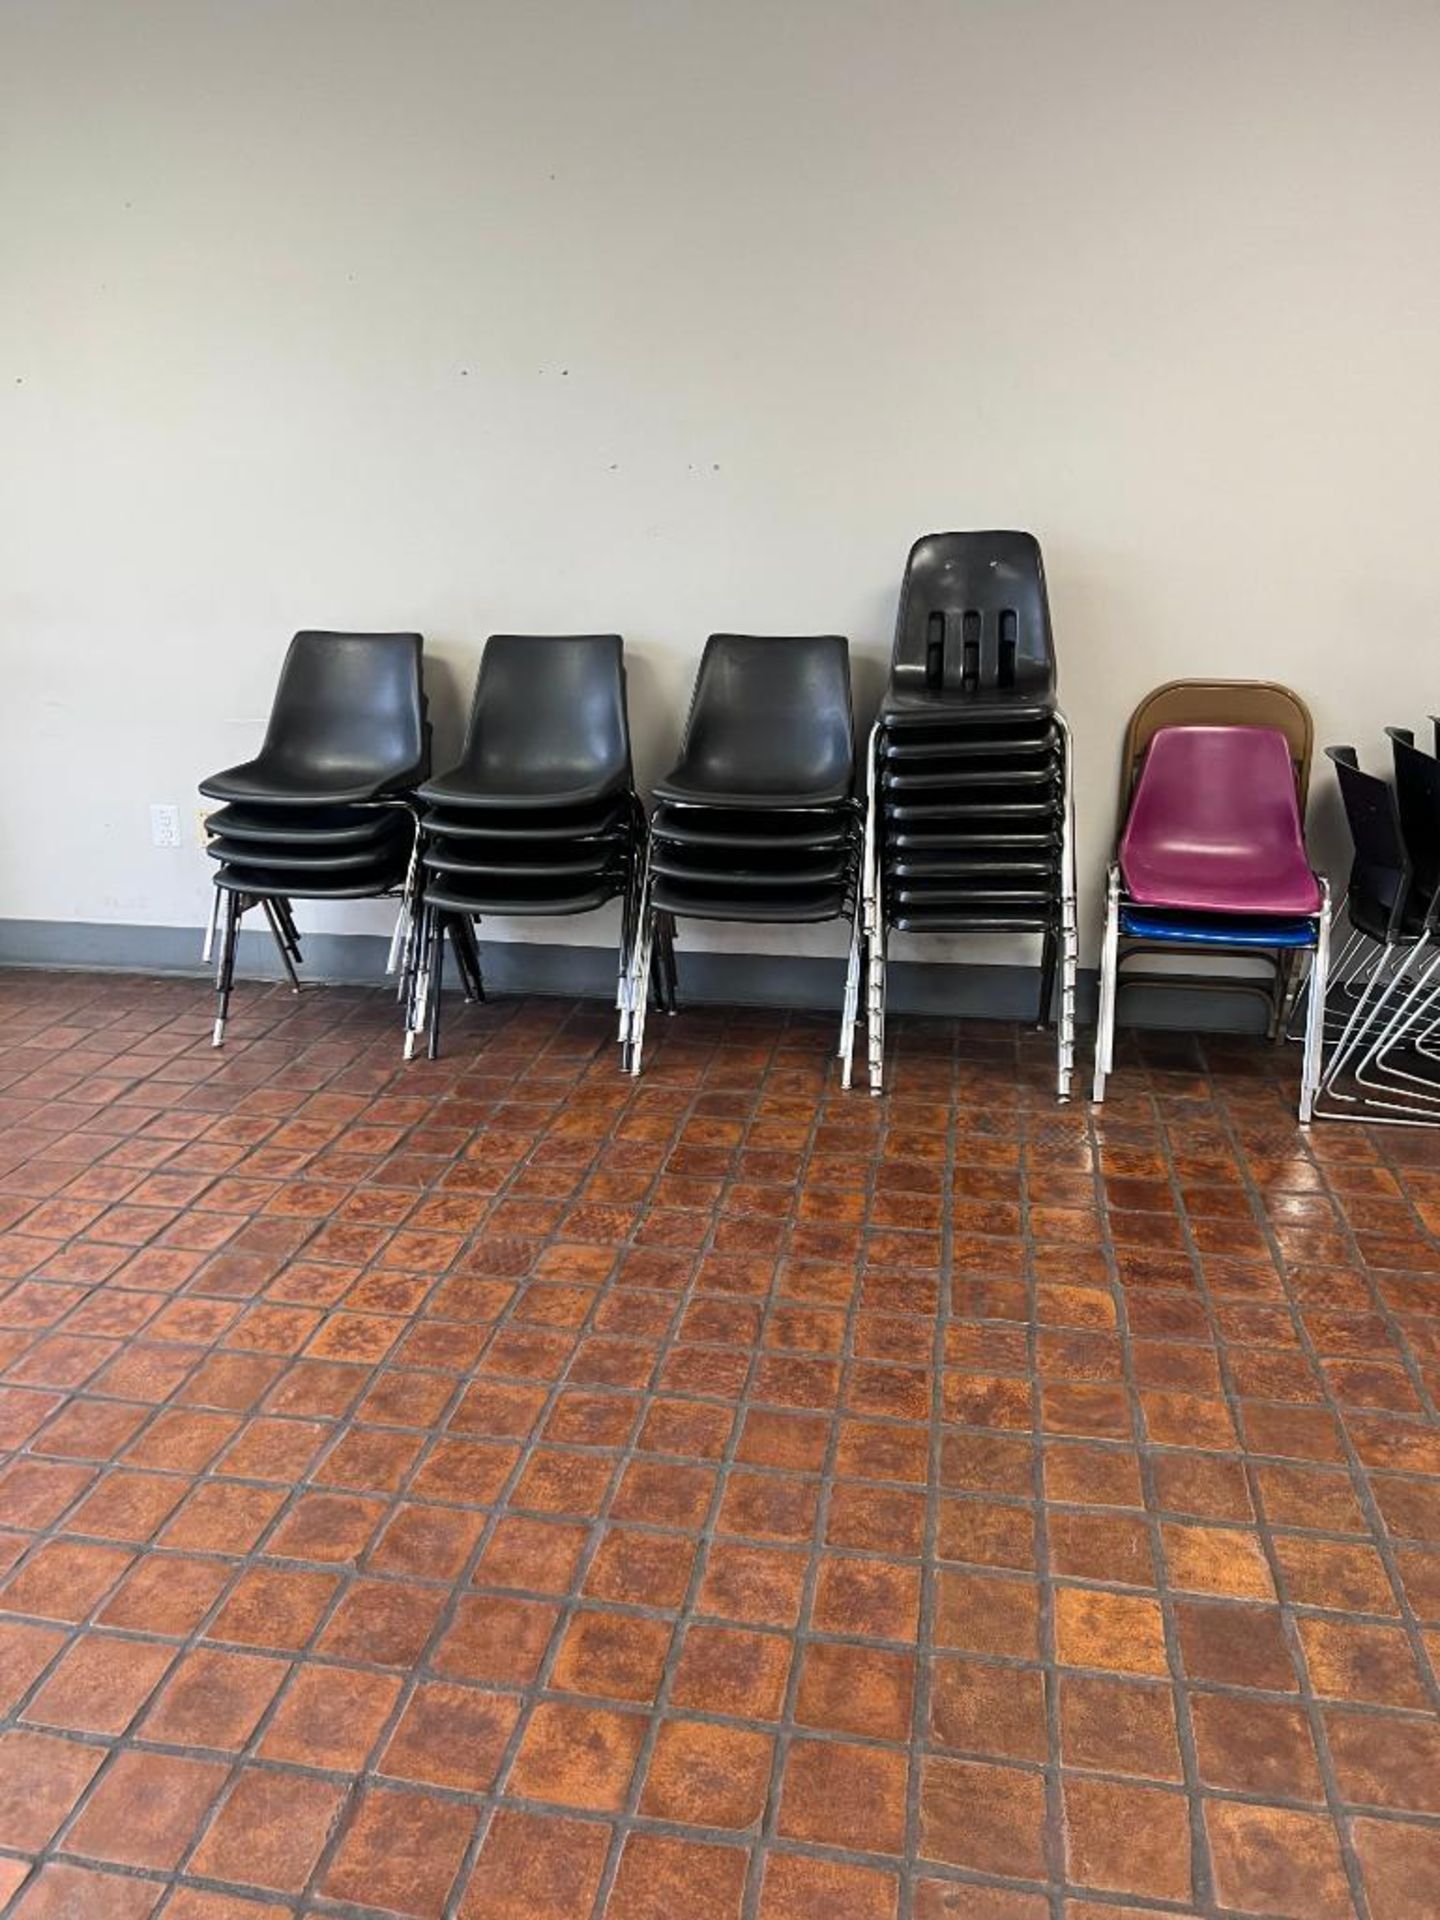 Break Room Furniture Consisting of (50) Chairs & (10) Tables ($100 Loading fee will be added to buye - Image 3 of 3